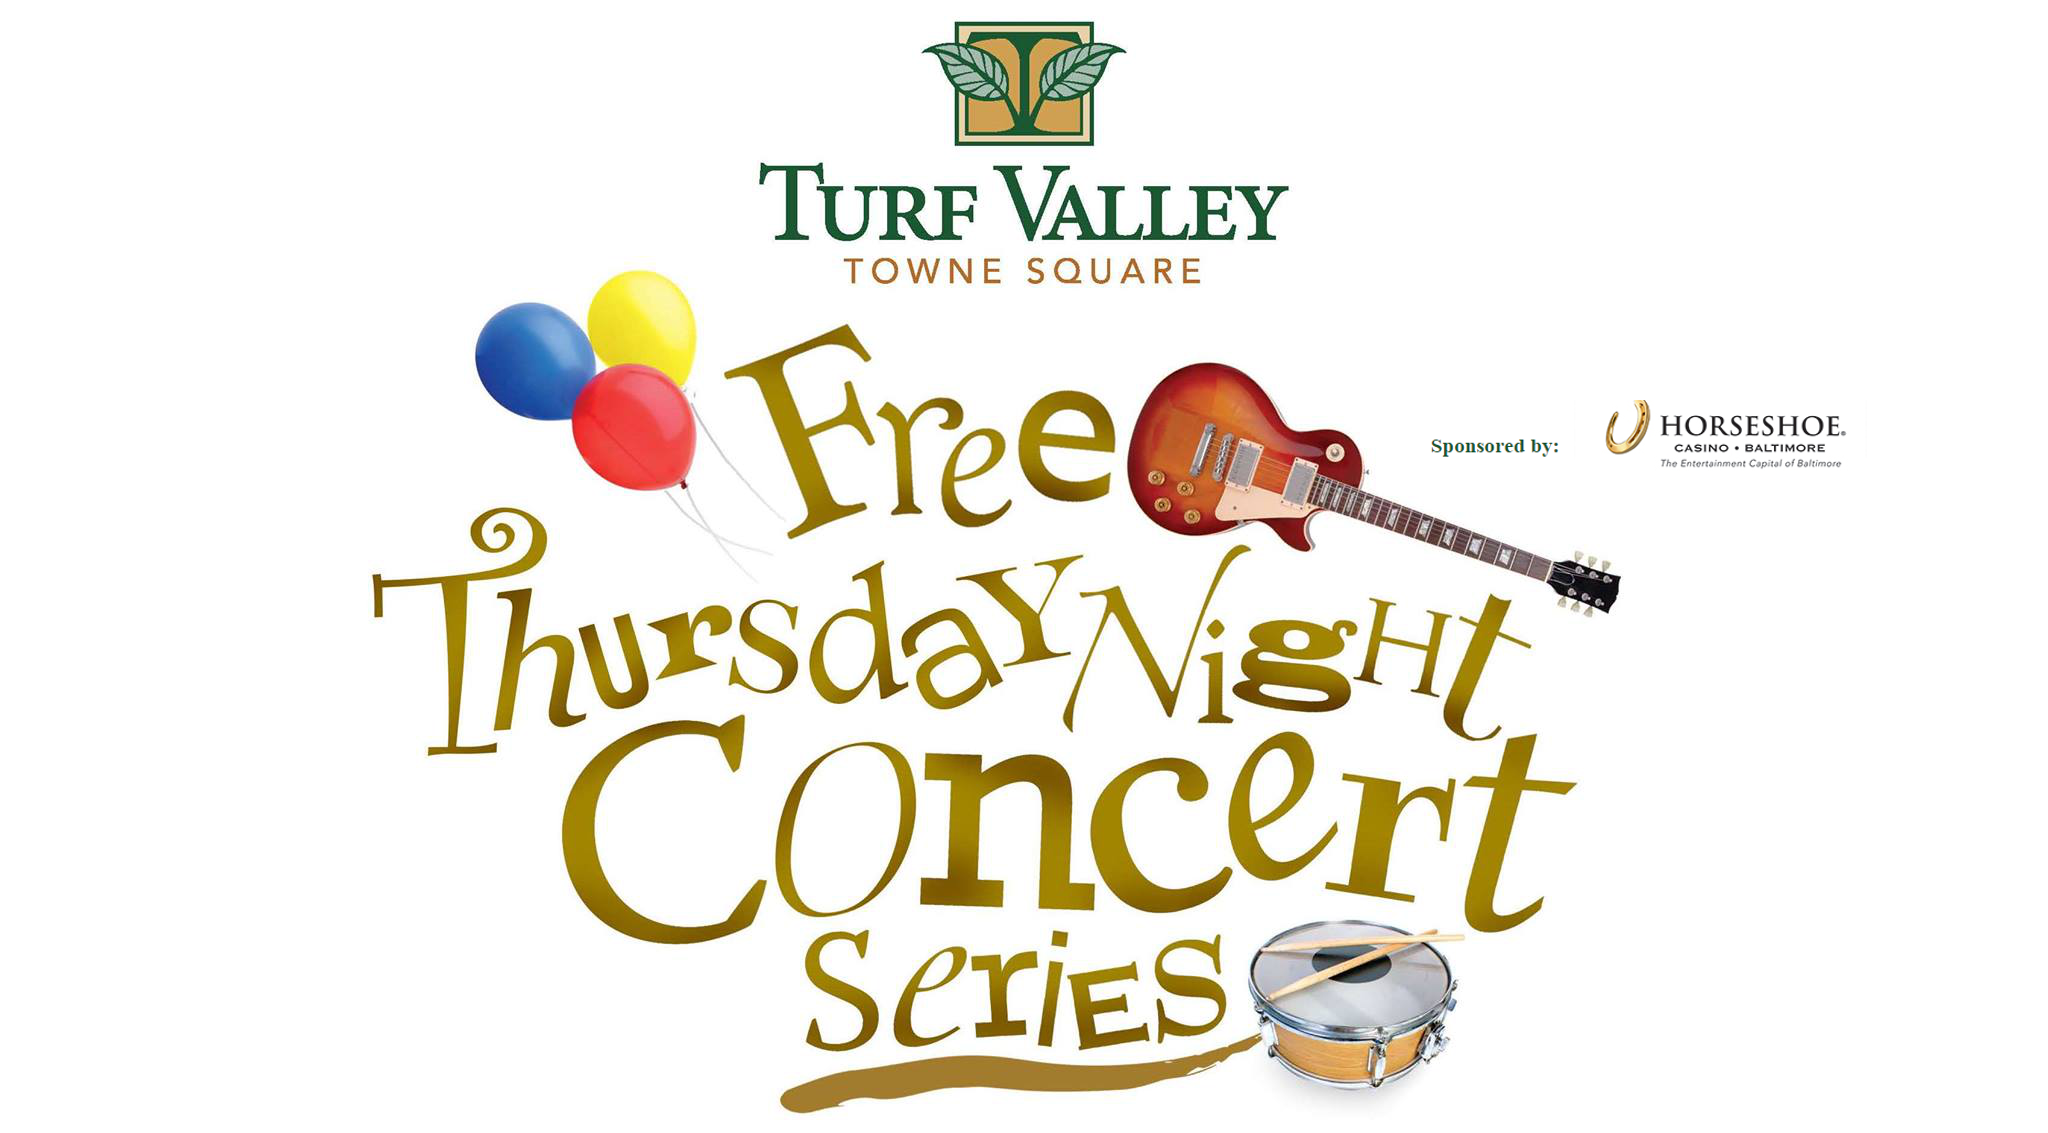 Paint Night at Turf Valley Thursday Night Concert Series